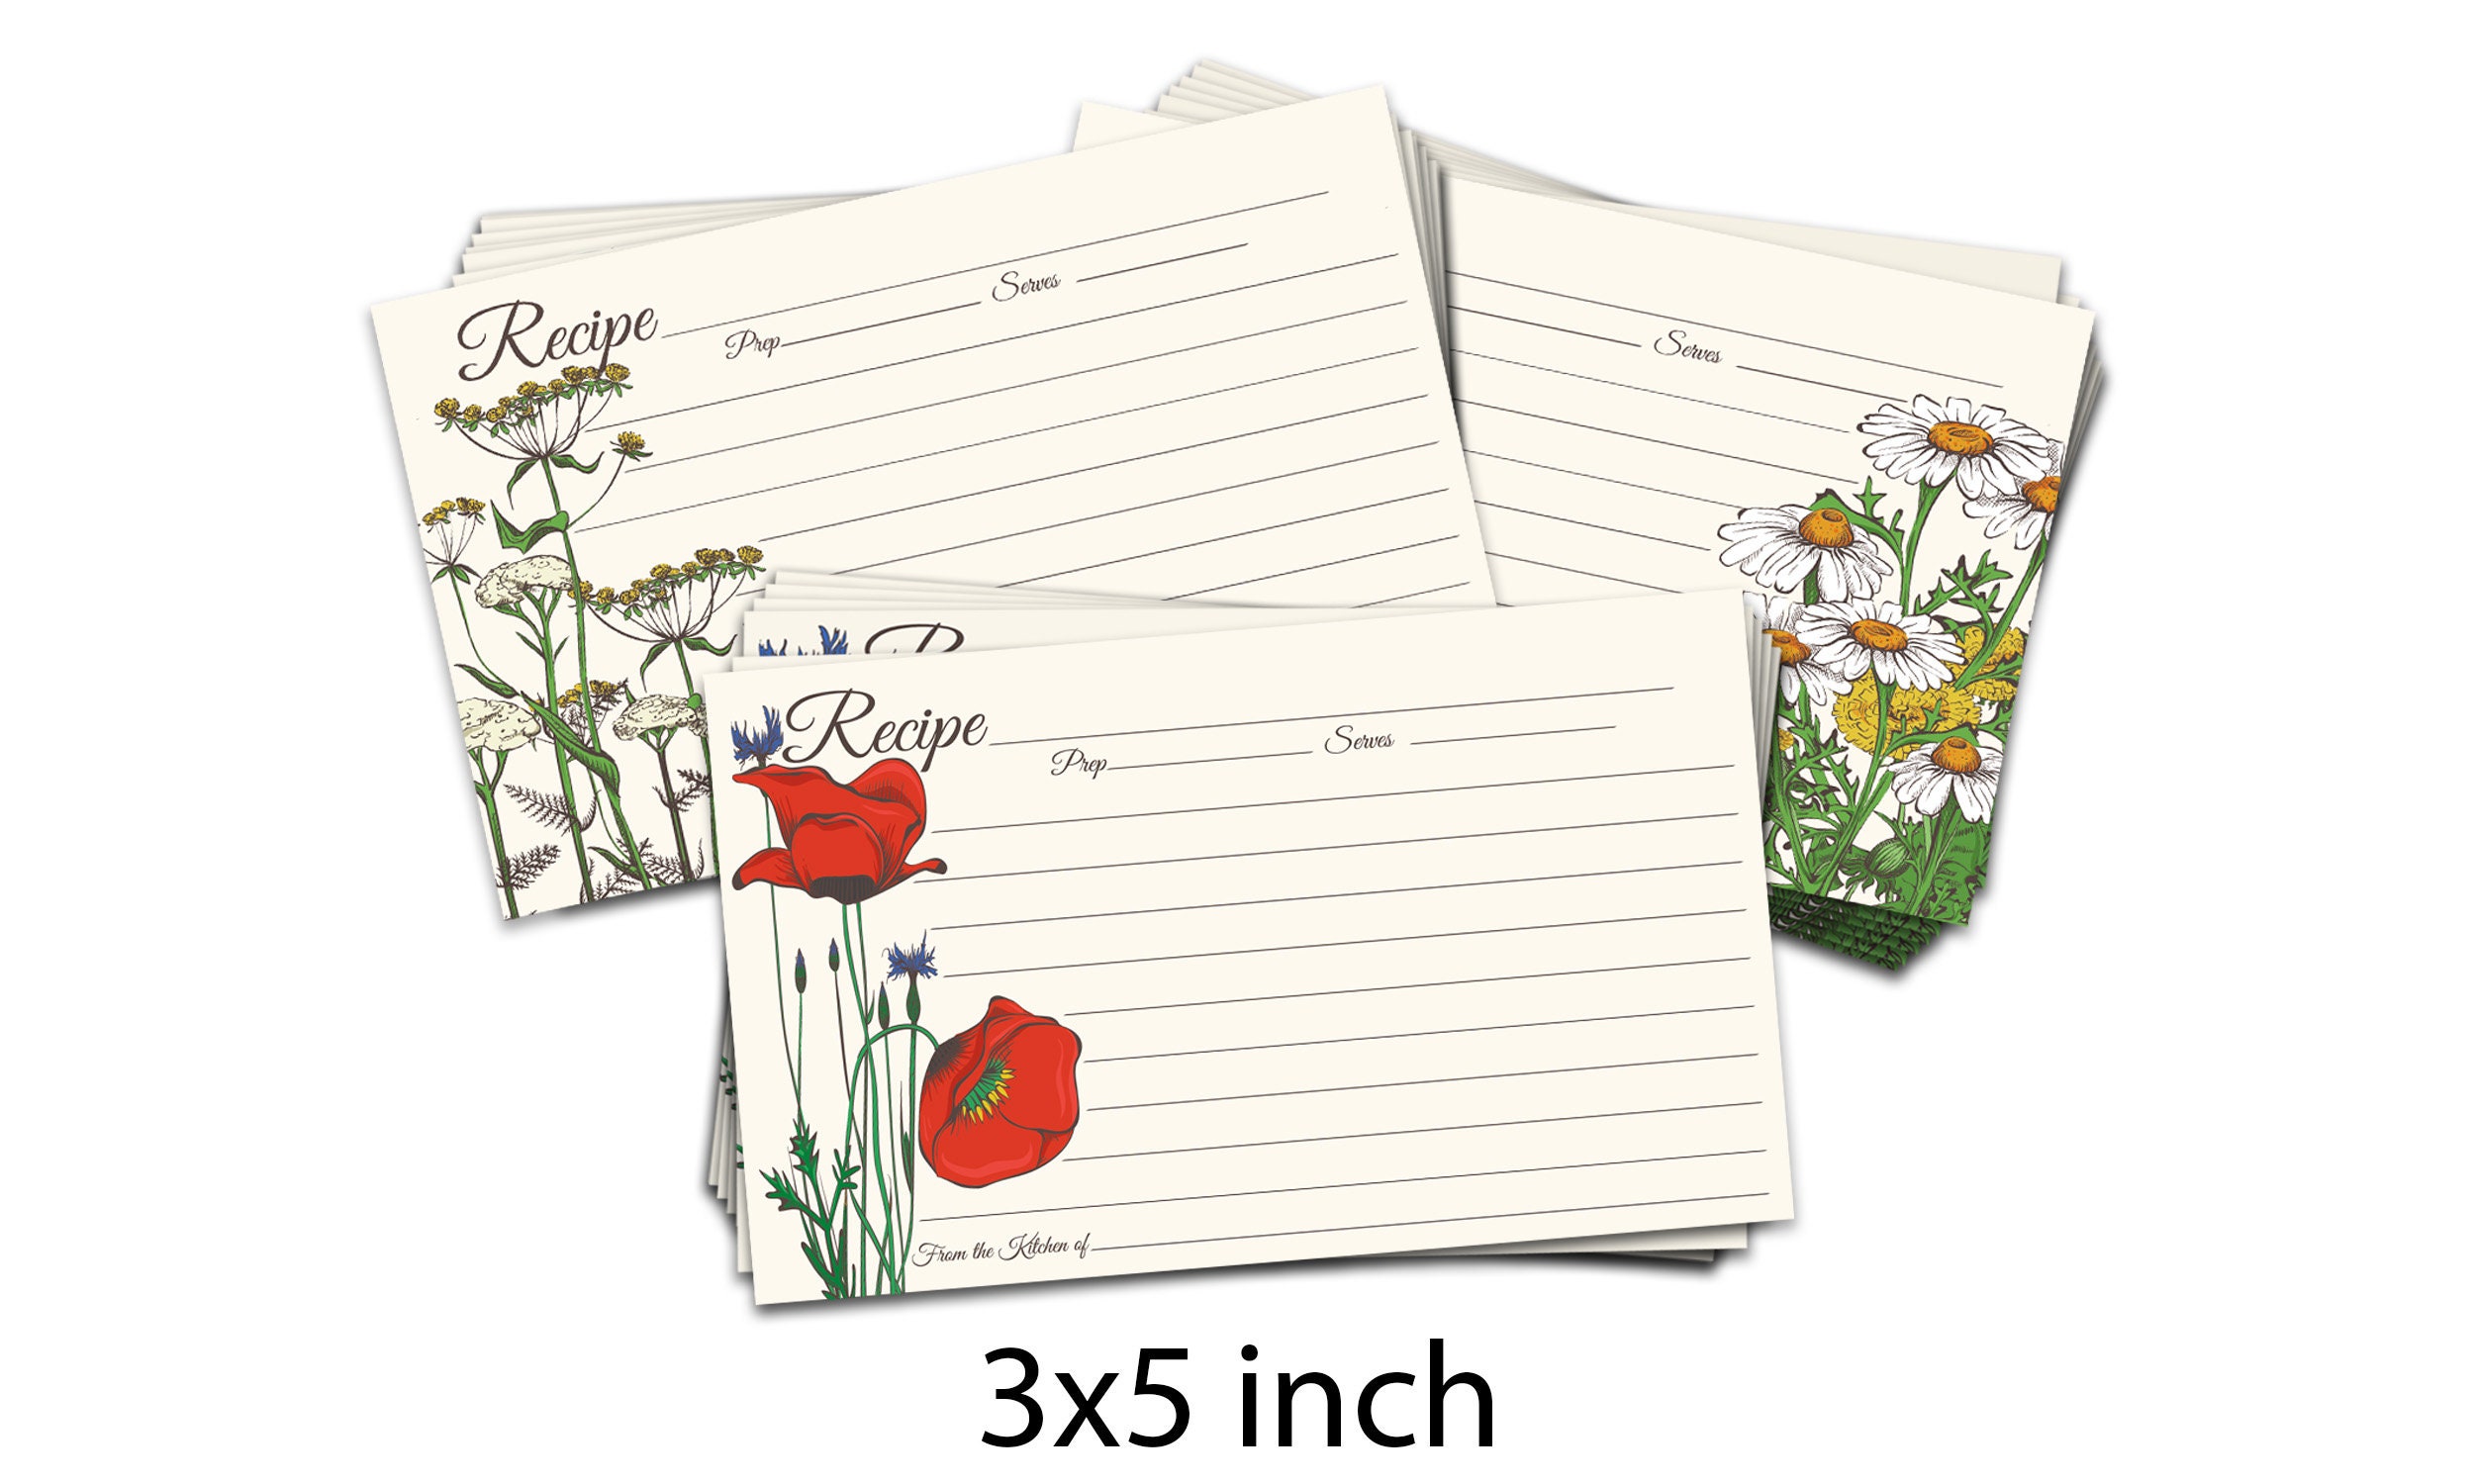 Buy C-Line Assorted 3 x 5 Index Card Case 24pk - CLI-58335 (CLI-58335)